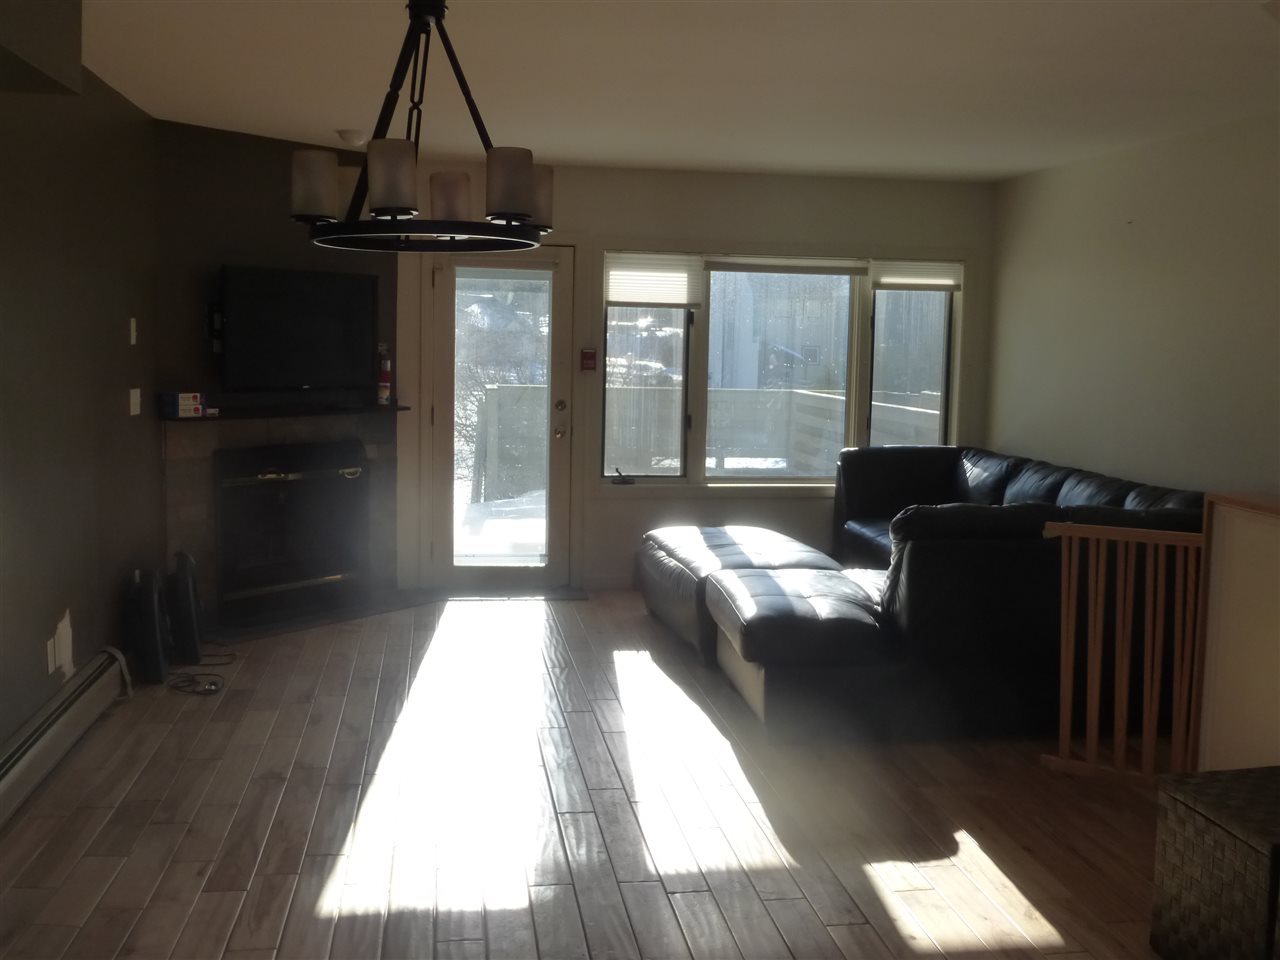  Commons 13 at Smugglers Notch, Unit 13